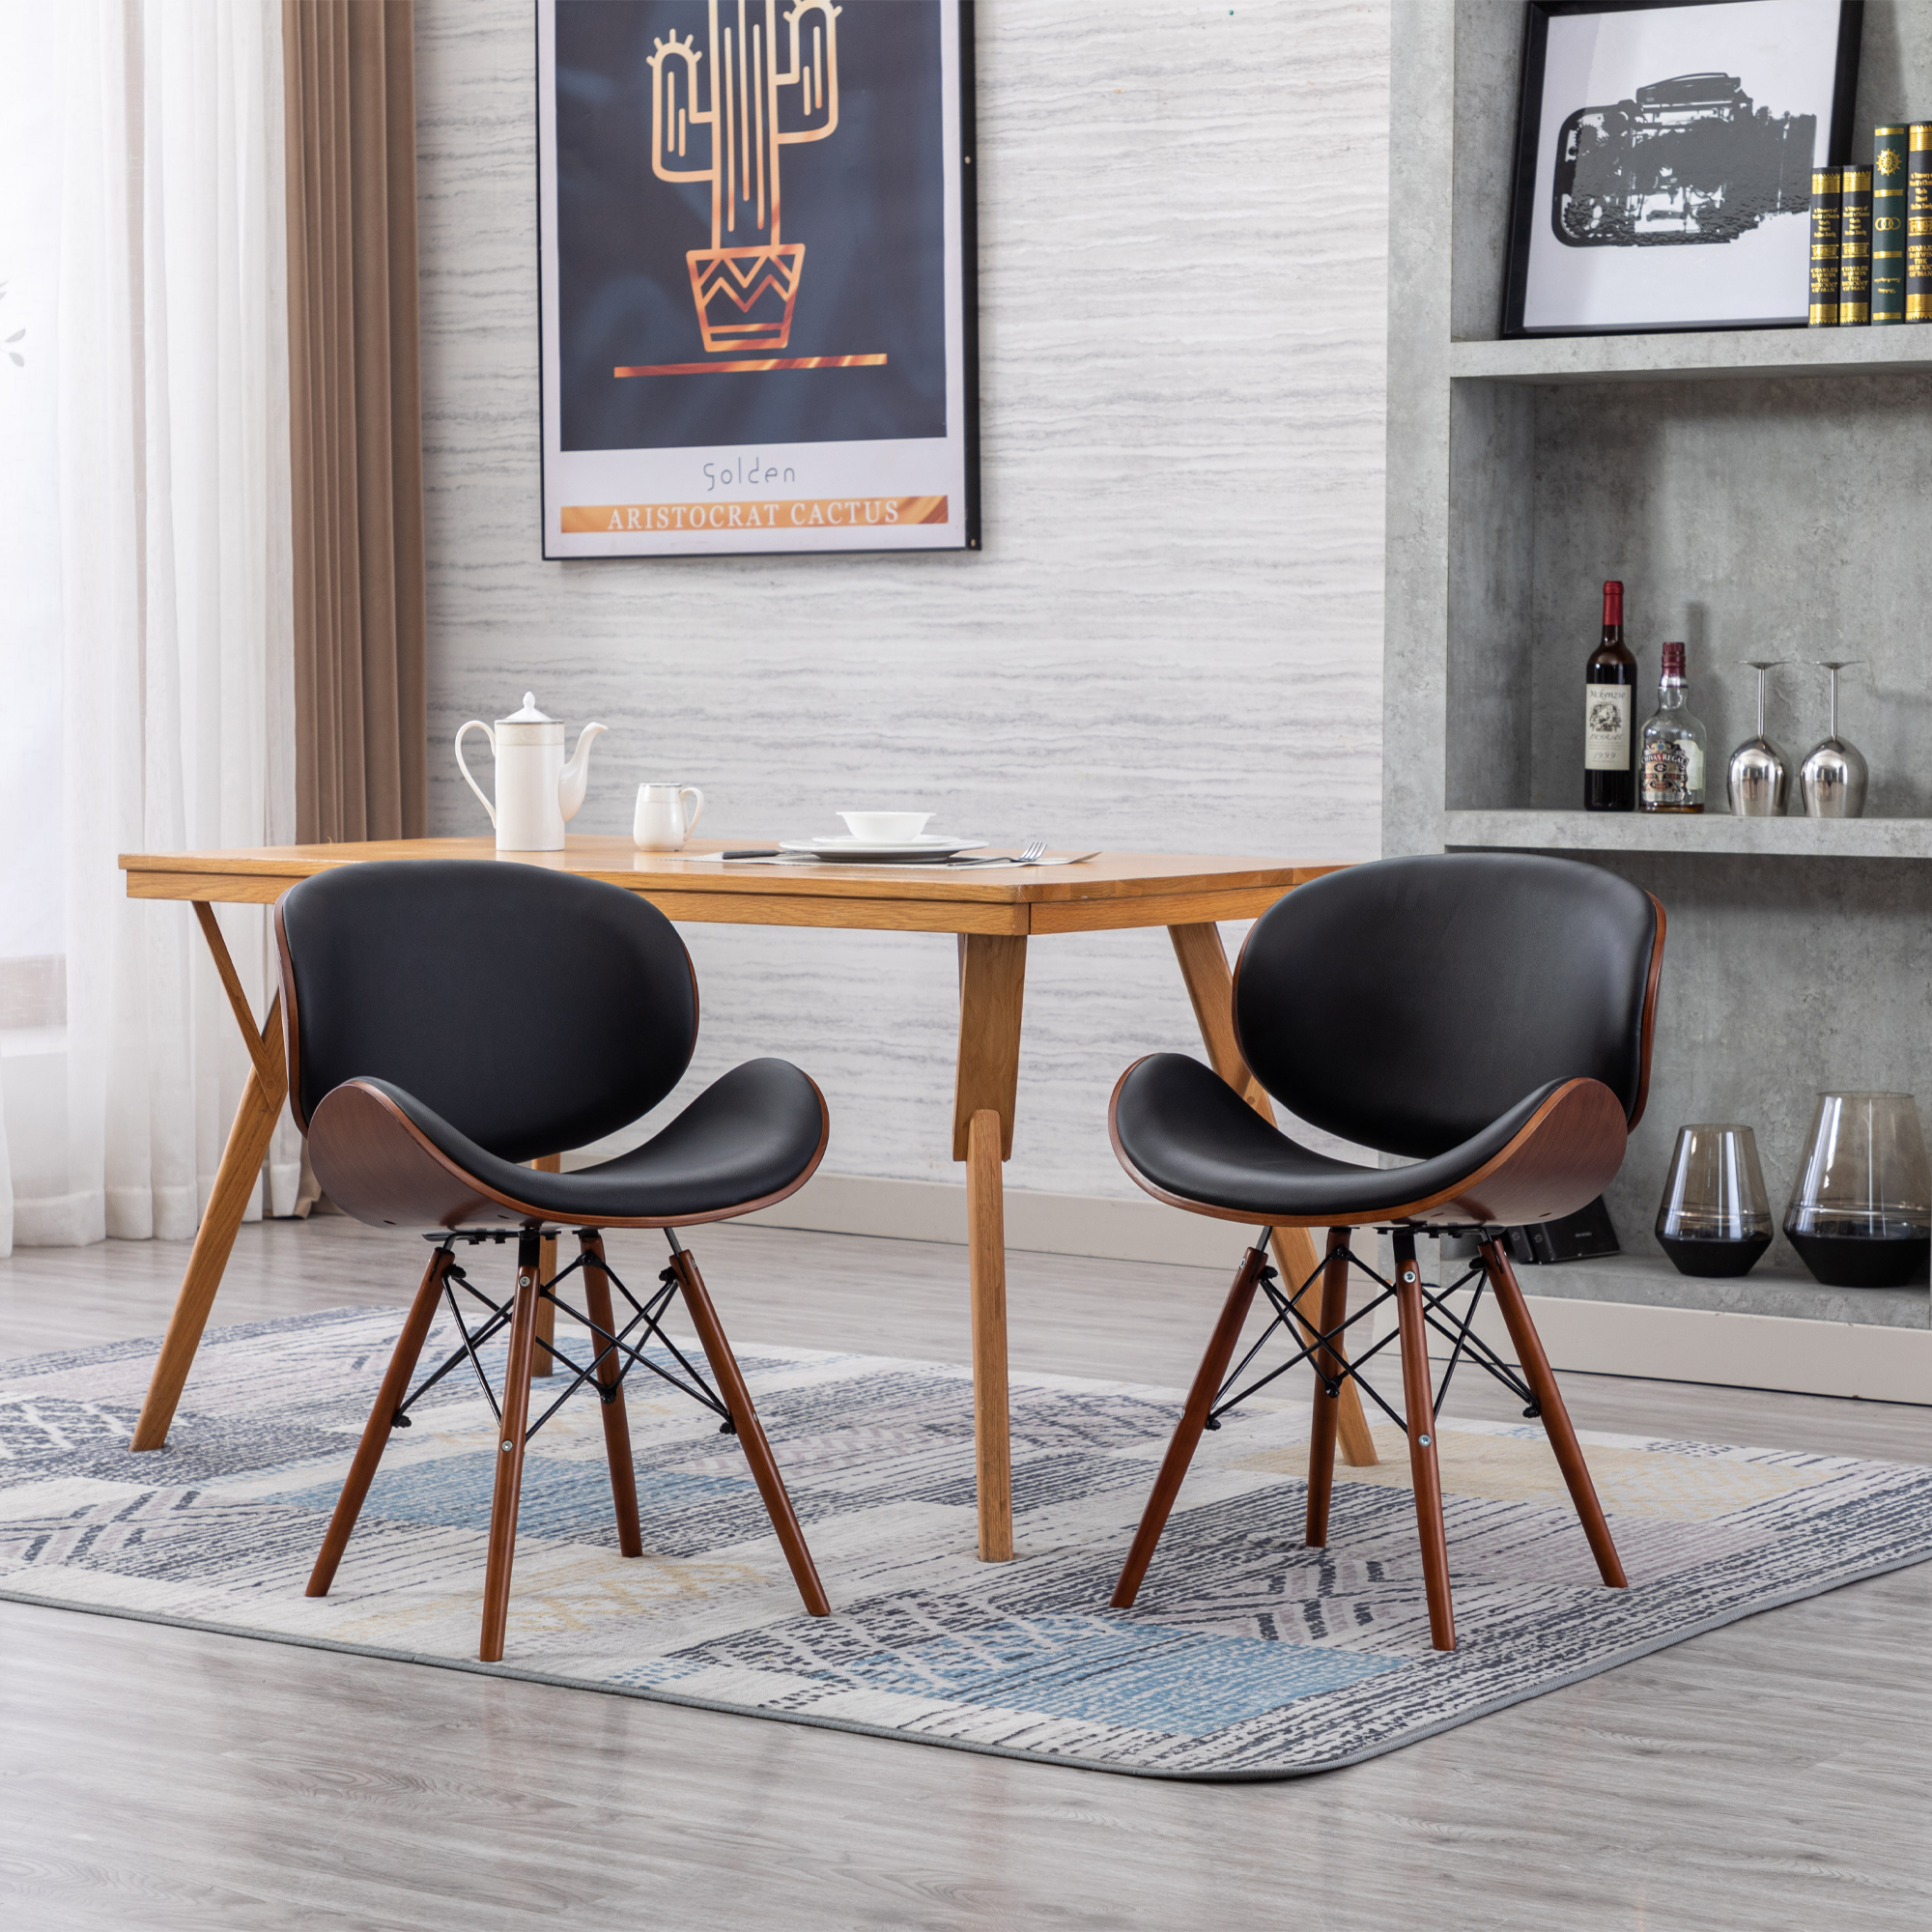 HengMing Mid Century Modern Accent Chairs, Upholstered Faux Leather Walnut Curved Back Contemporary Dining Kitchen, Minimalist Vintage Style [Set of 2] Black